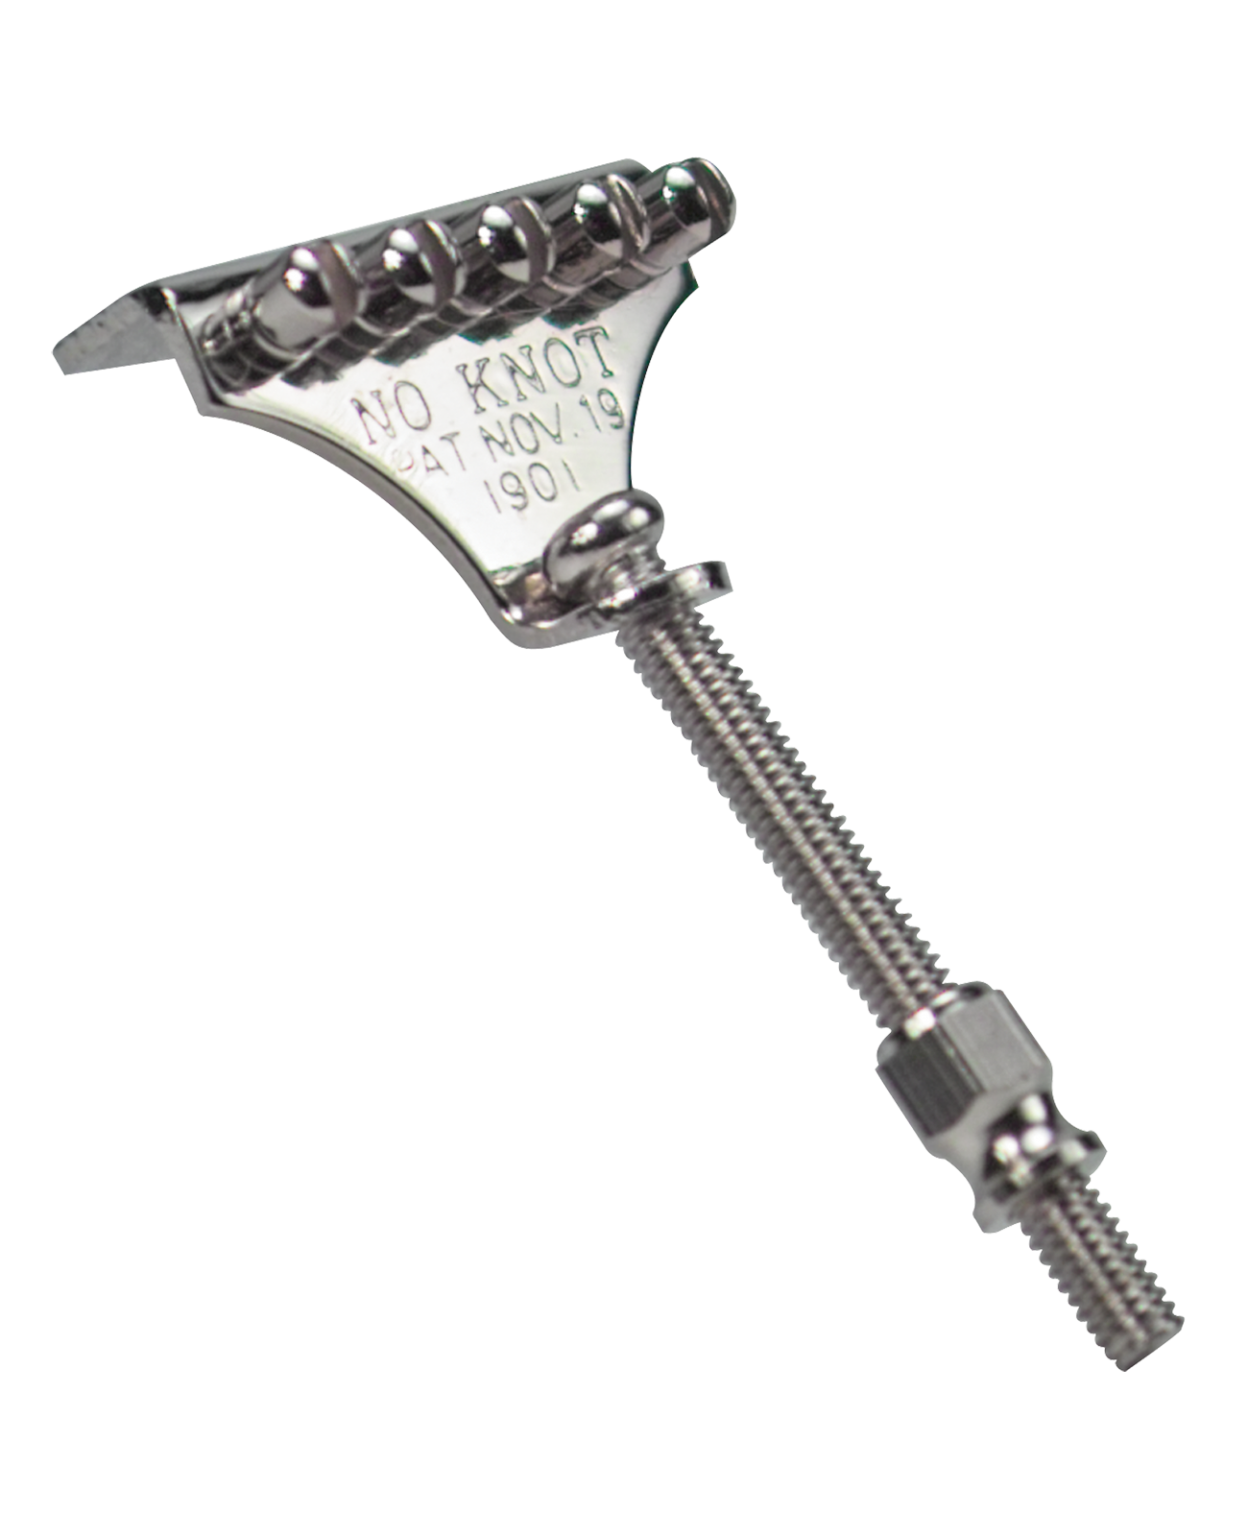 Golden Gate P-115 No-Knot Style Banjo Tailpiece – Nickel